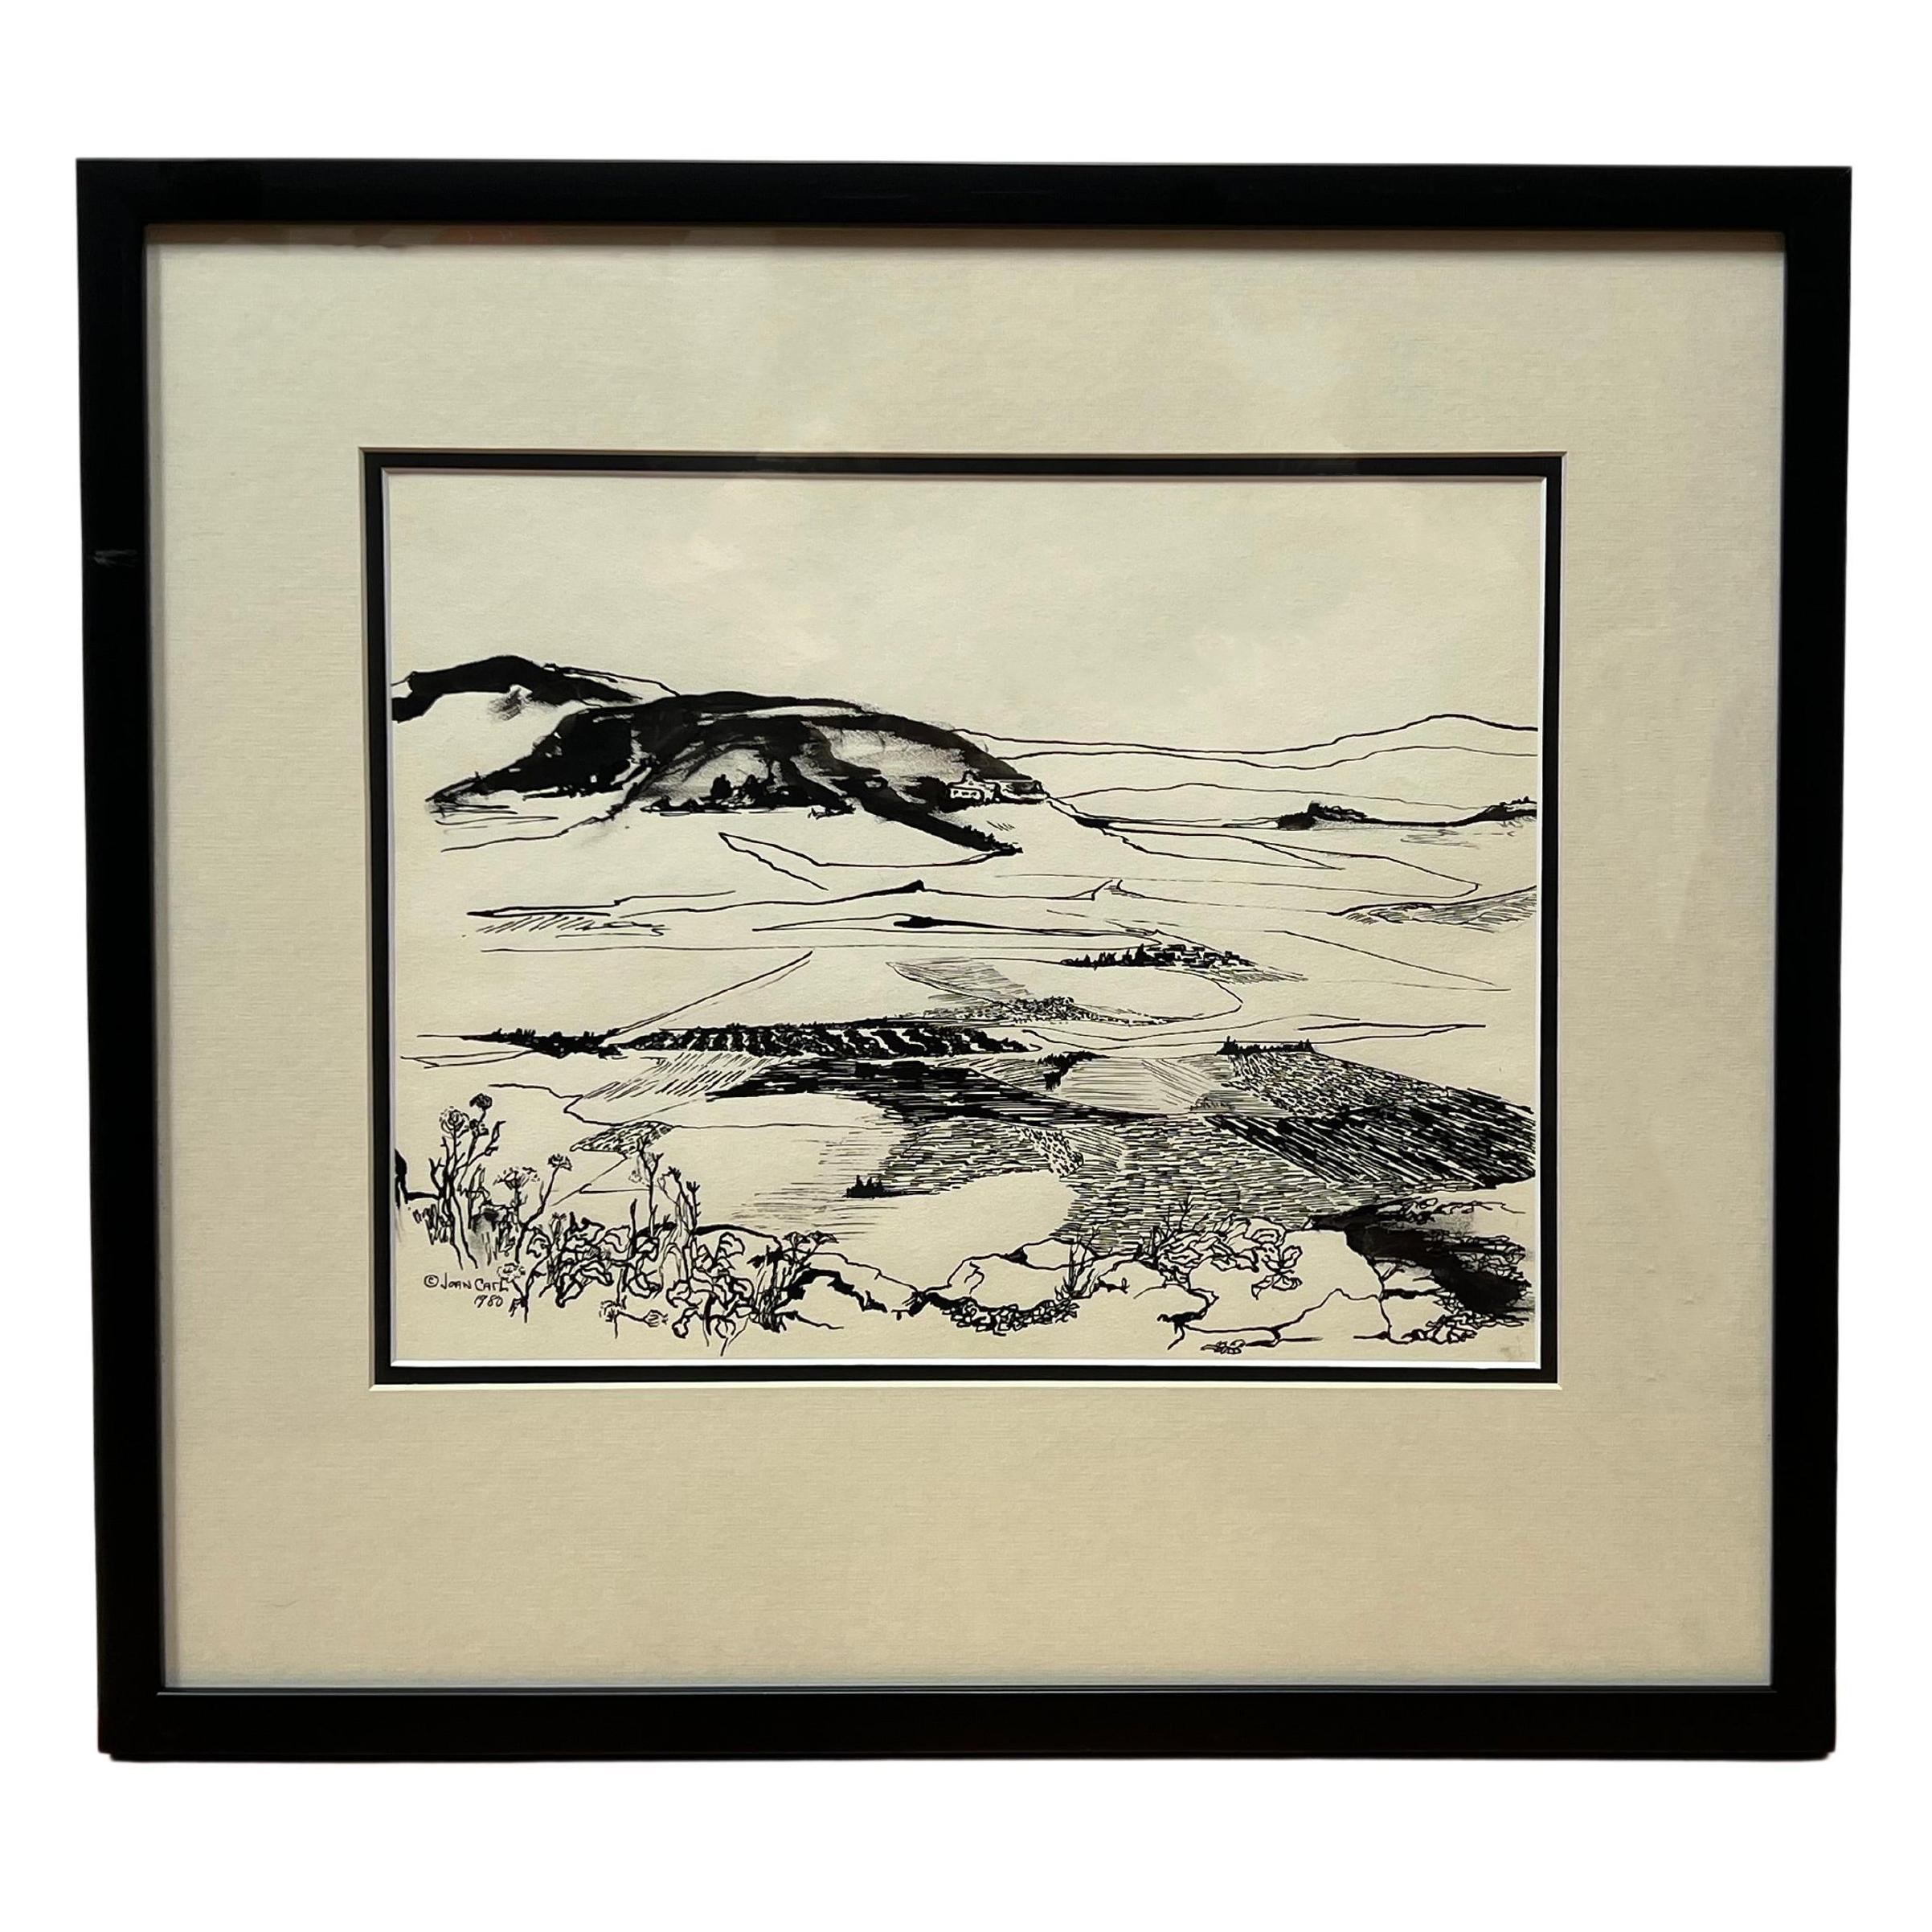 "Two Villages" is a black and white landscape ink drawing by Joan Carl Strauss that unfolds a narrative of hidden rivalry within a picturesque valley. 

In the heart of a flat-floored valley, two villages confront each other, each perched in